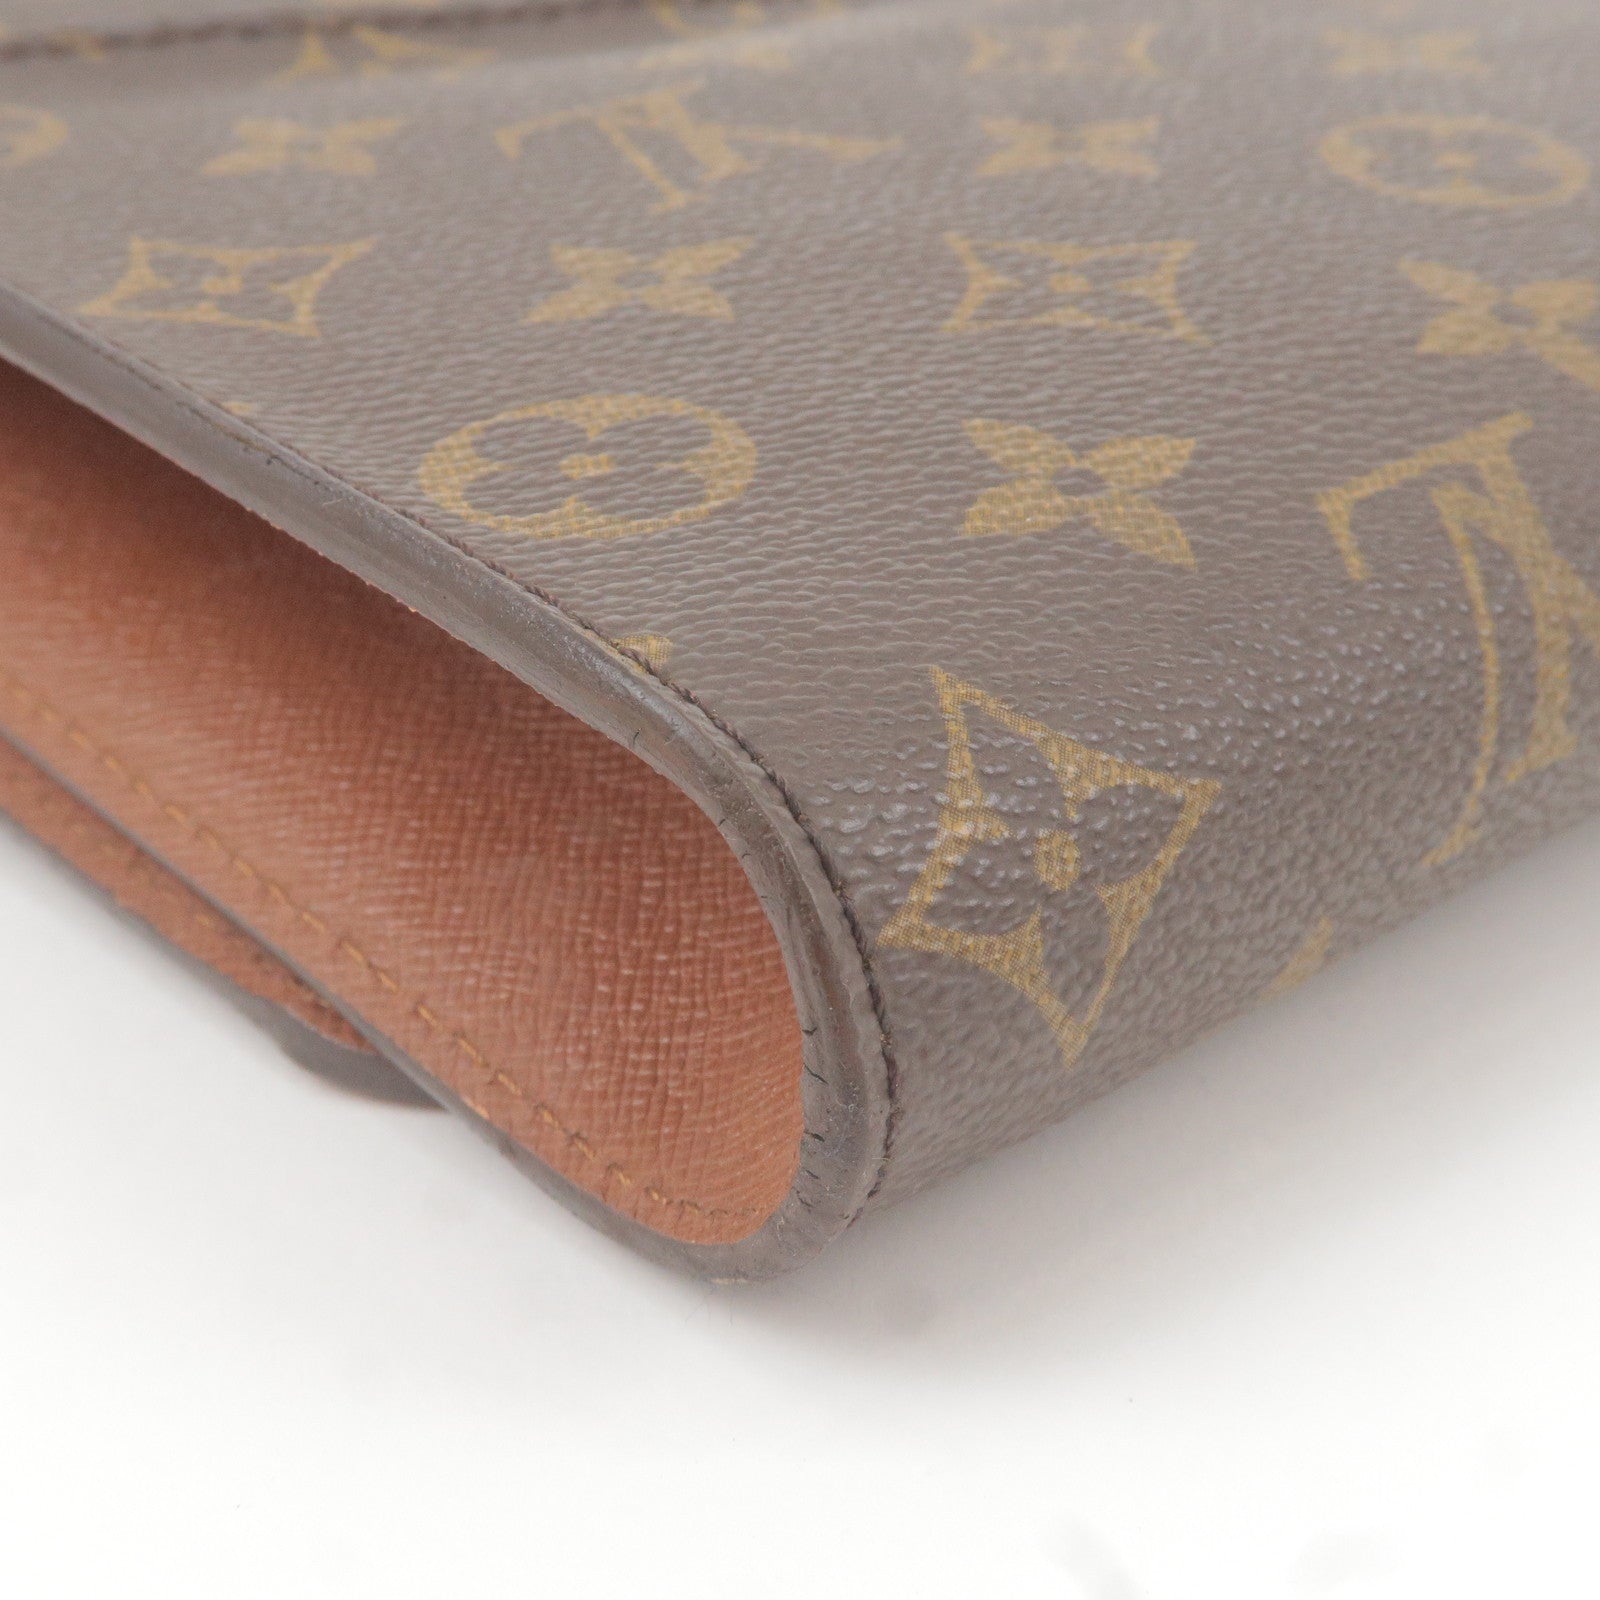 Louis Vuitton 2019 pre-owned Monogram Montaigne MM two-way Bag